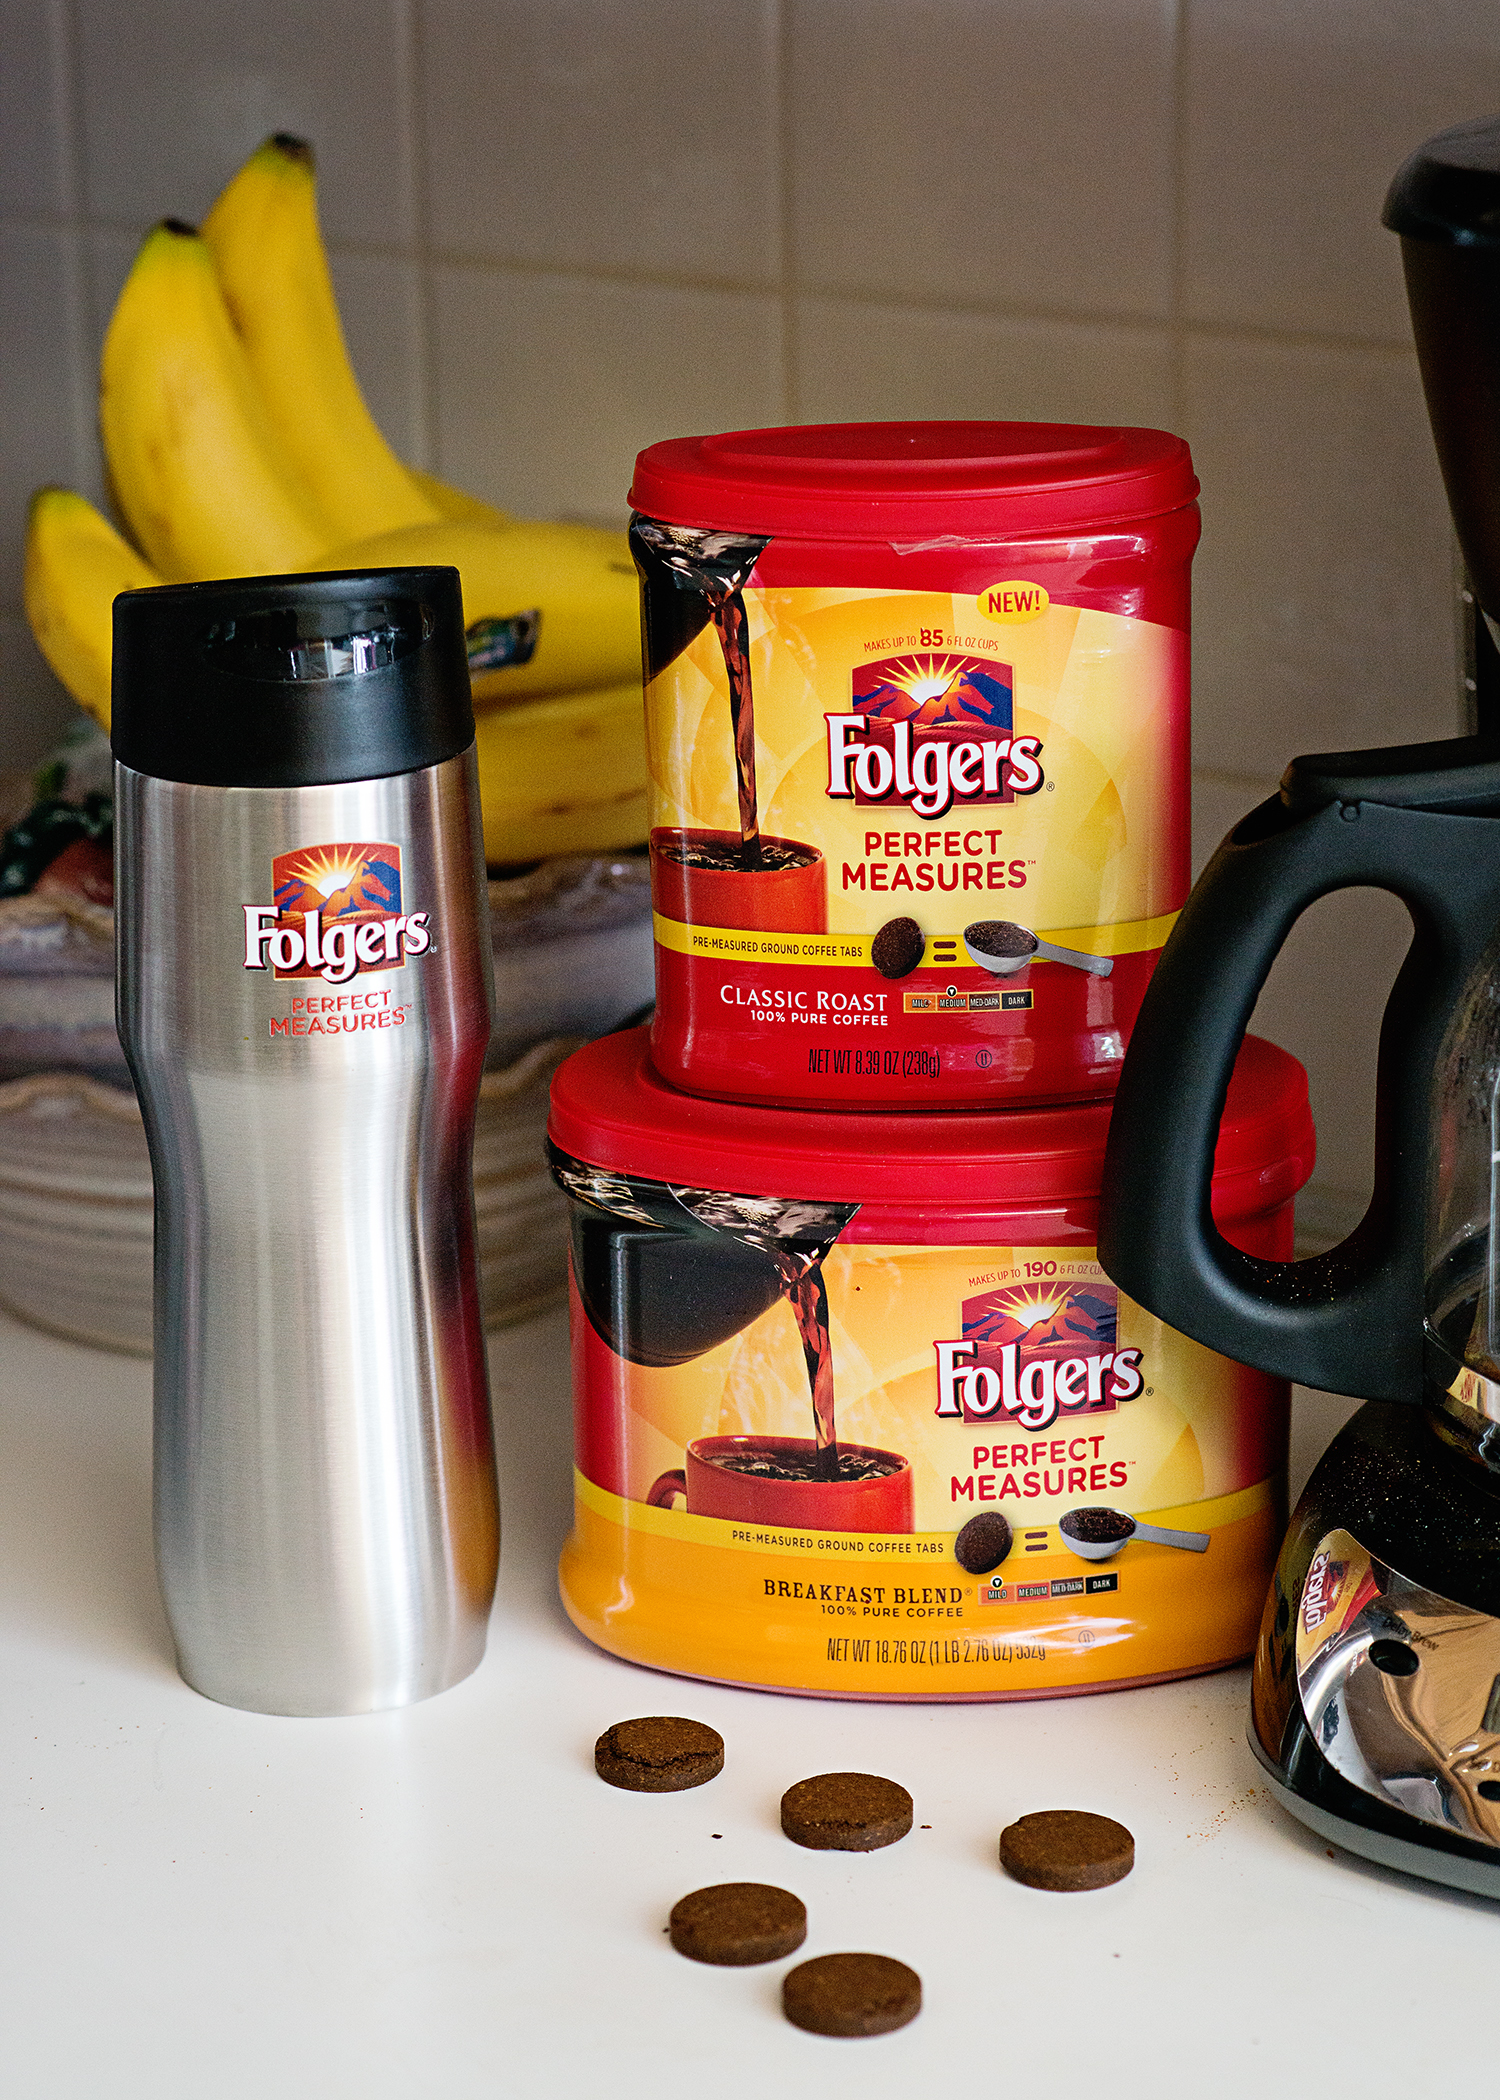 Ready for a Smooth Morning? Making Coffee Just Got Easier!